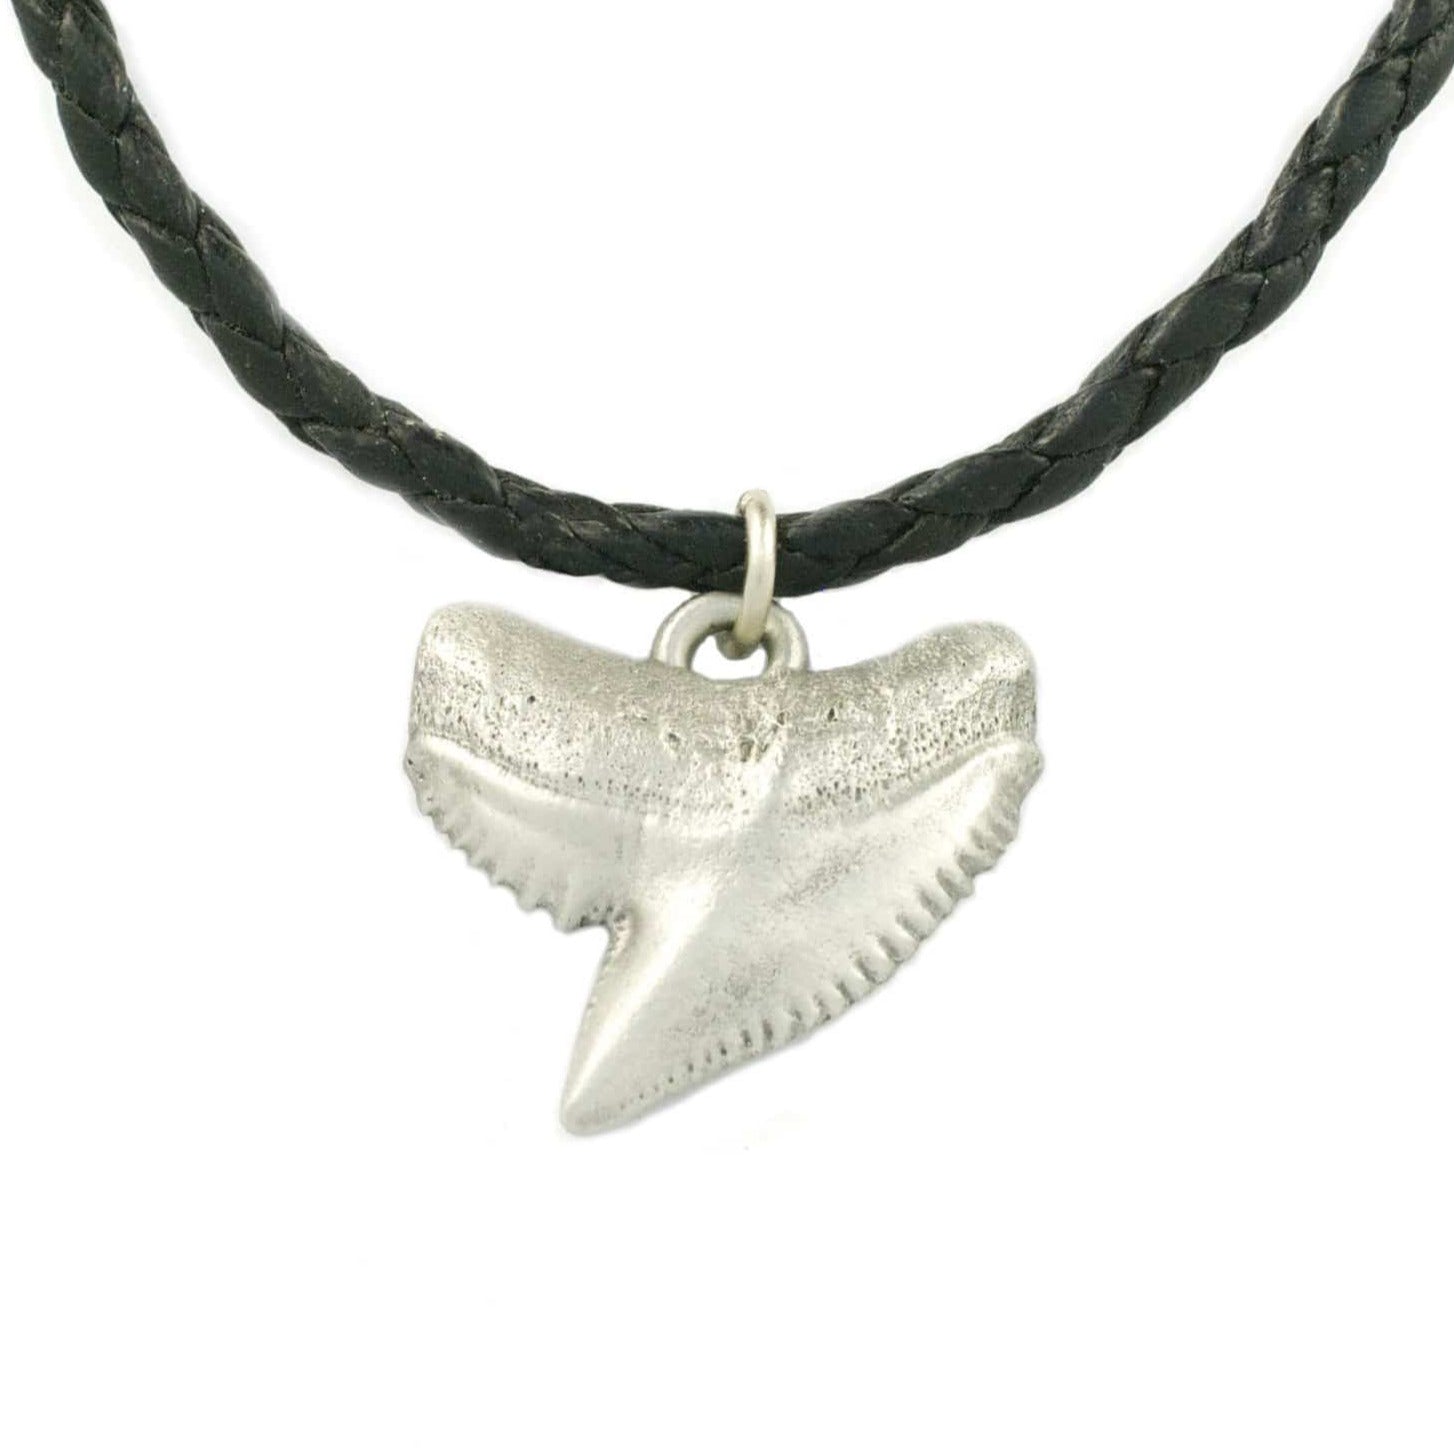 Shark Tooth Necklace for Men and Women -Shark Tooth Pendant, Shark Gift, Gifts for Shark Lovers, Beachy Jewelry, Shark Tooth Charm, Women's, Size: 18